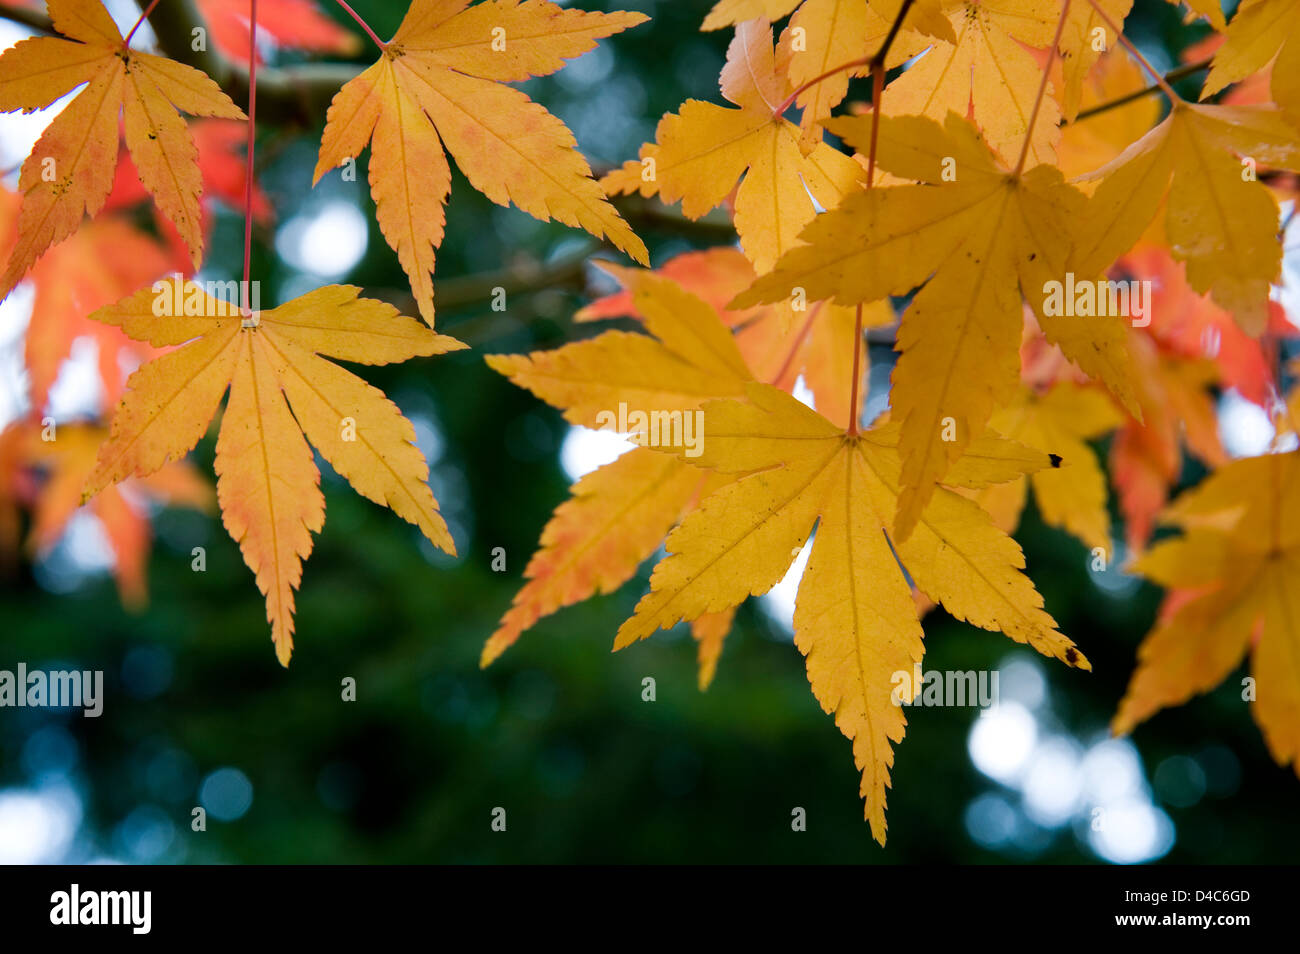 Artistic composition of yellow-orange Japanese maple foliage leaves in the autumn. Stock Photo